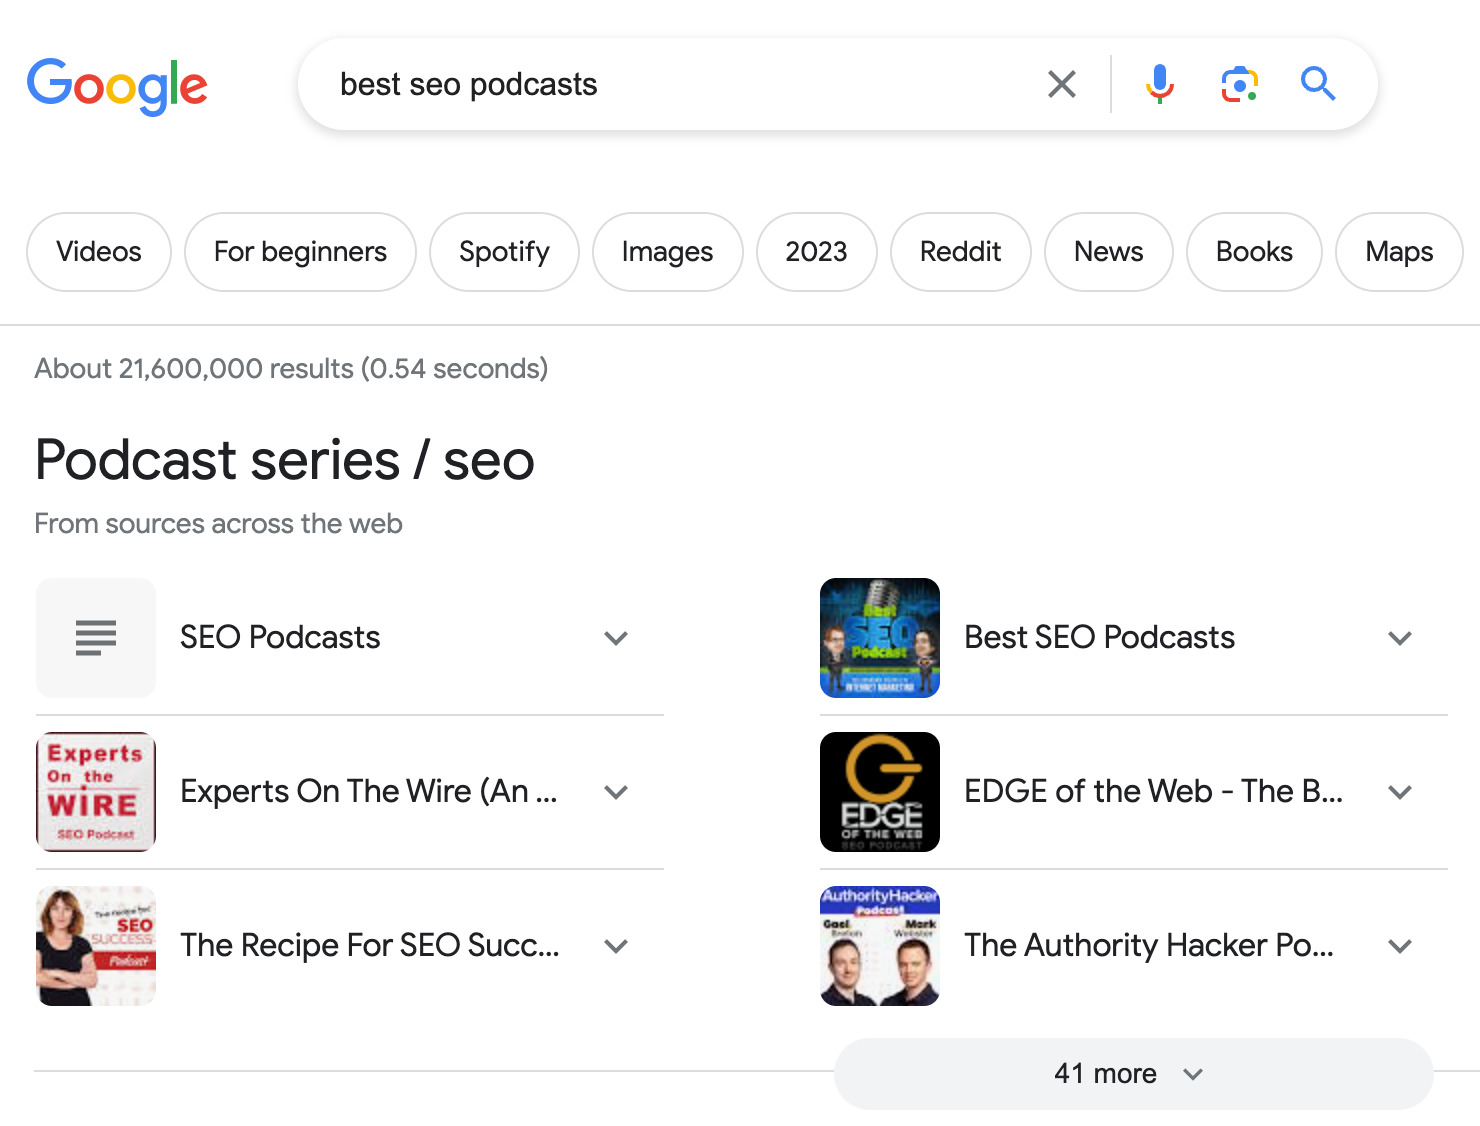 Google search for "best SEO podcasts"
